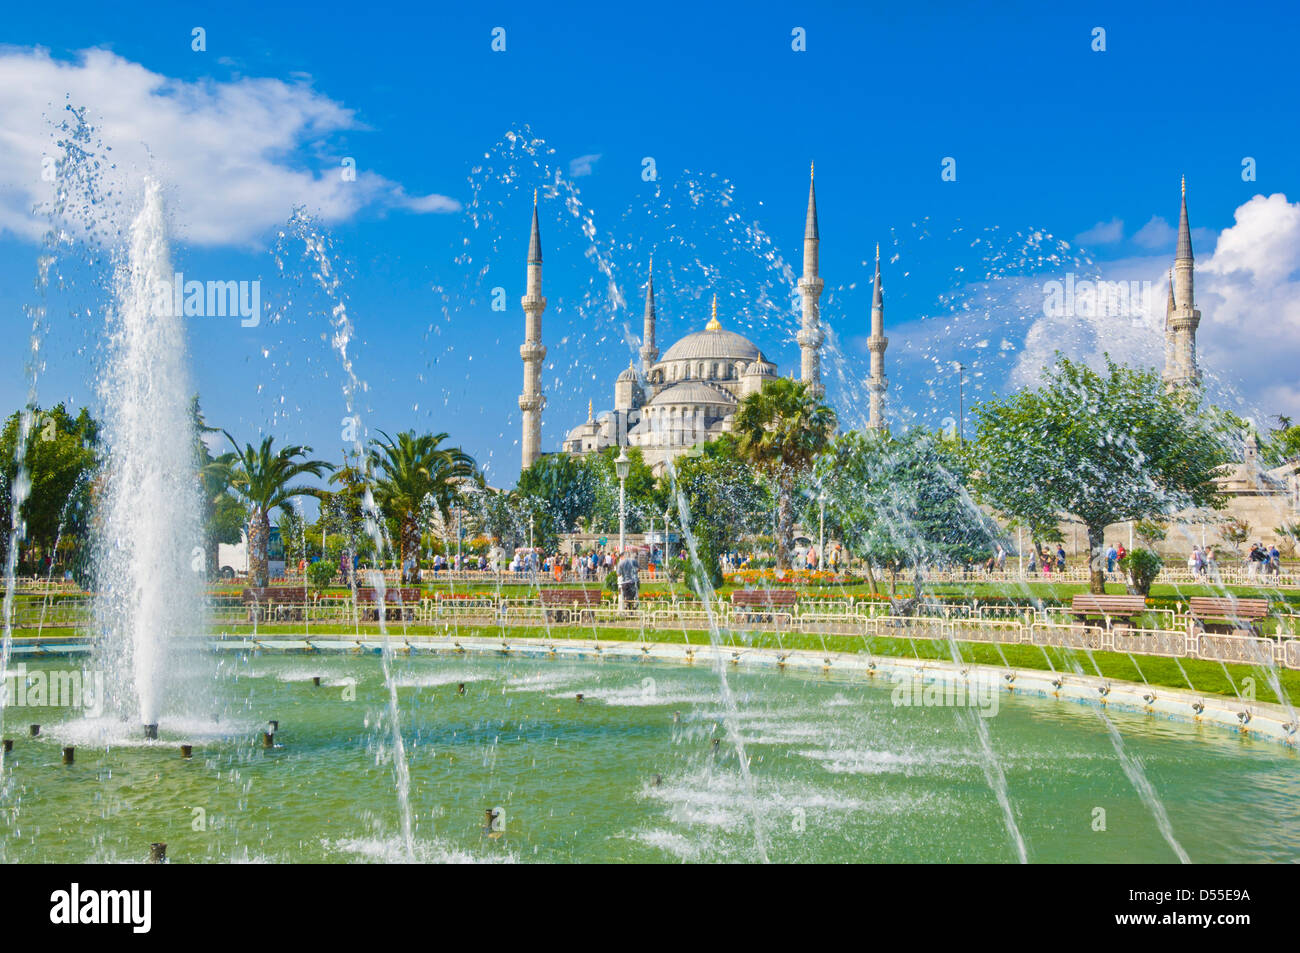 The Blue Mosque (Sultan Ahmet Camii) with domes and minarets, Sultanahmet, central Istanbul, Turkey Stock Photo